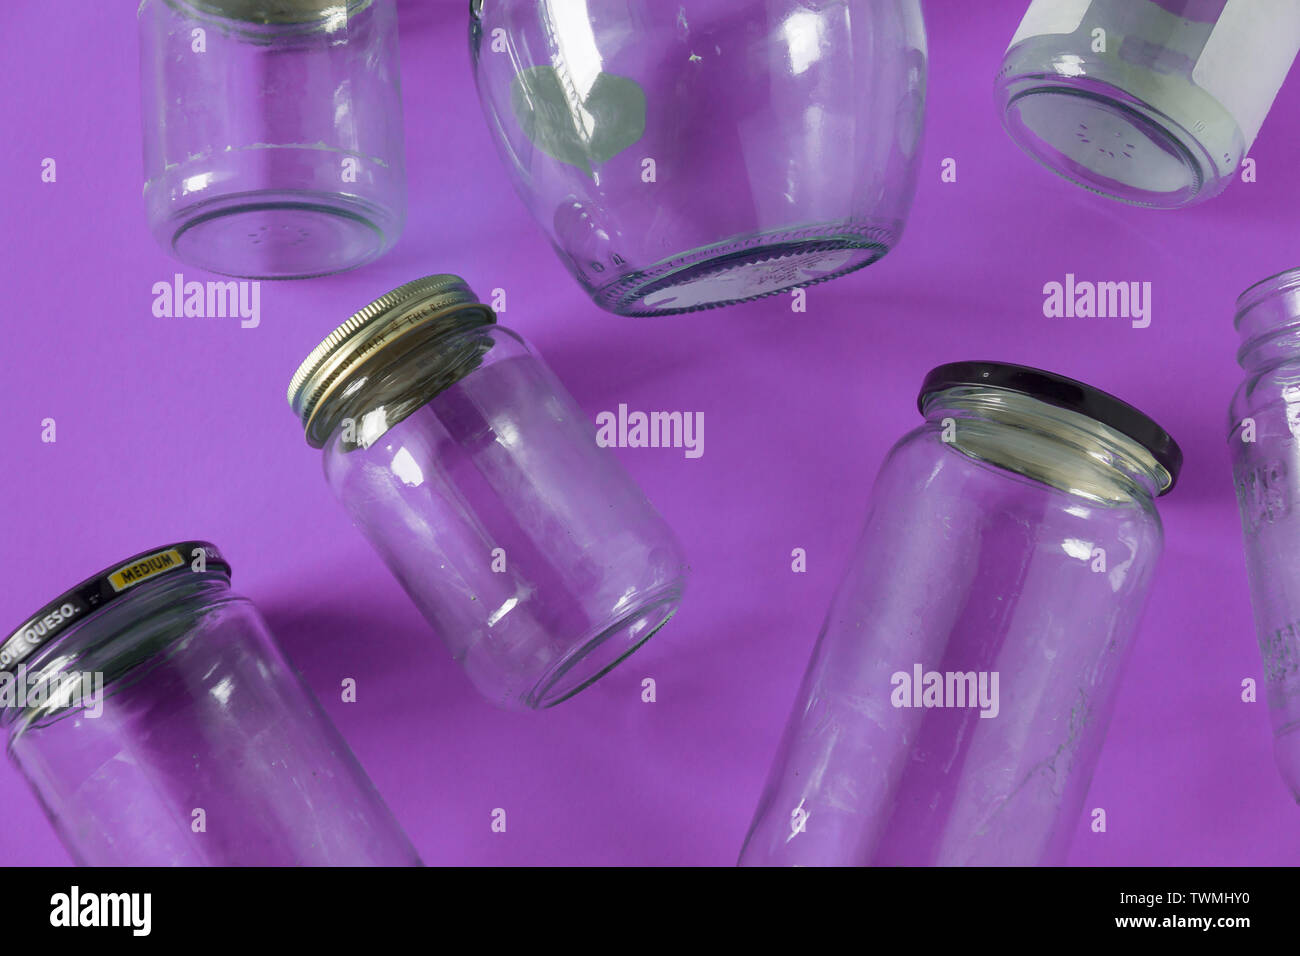 Transparent glass jars with lids isolated on purple background, top view flat lay recycling concept for environmental awareness. Segregated recyclable Stock Photo